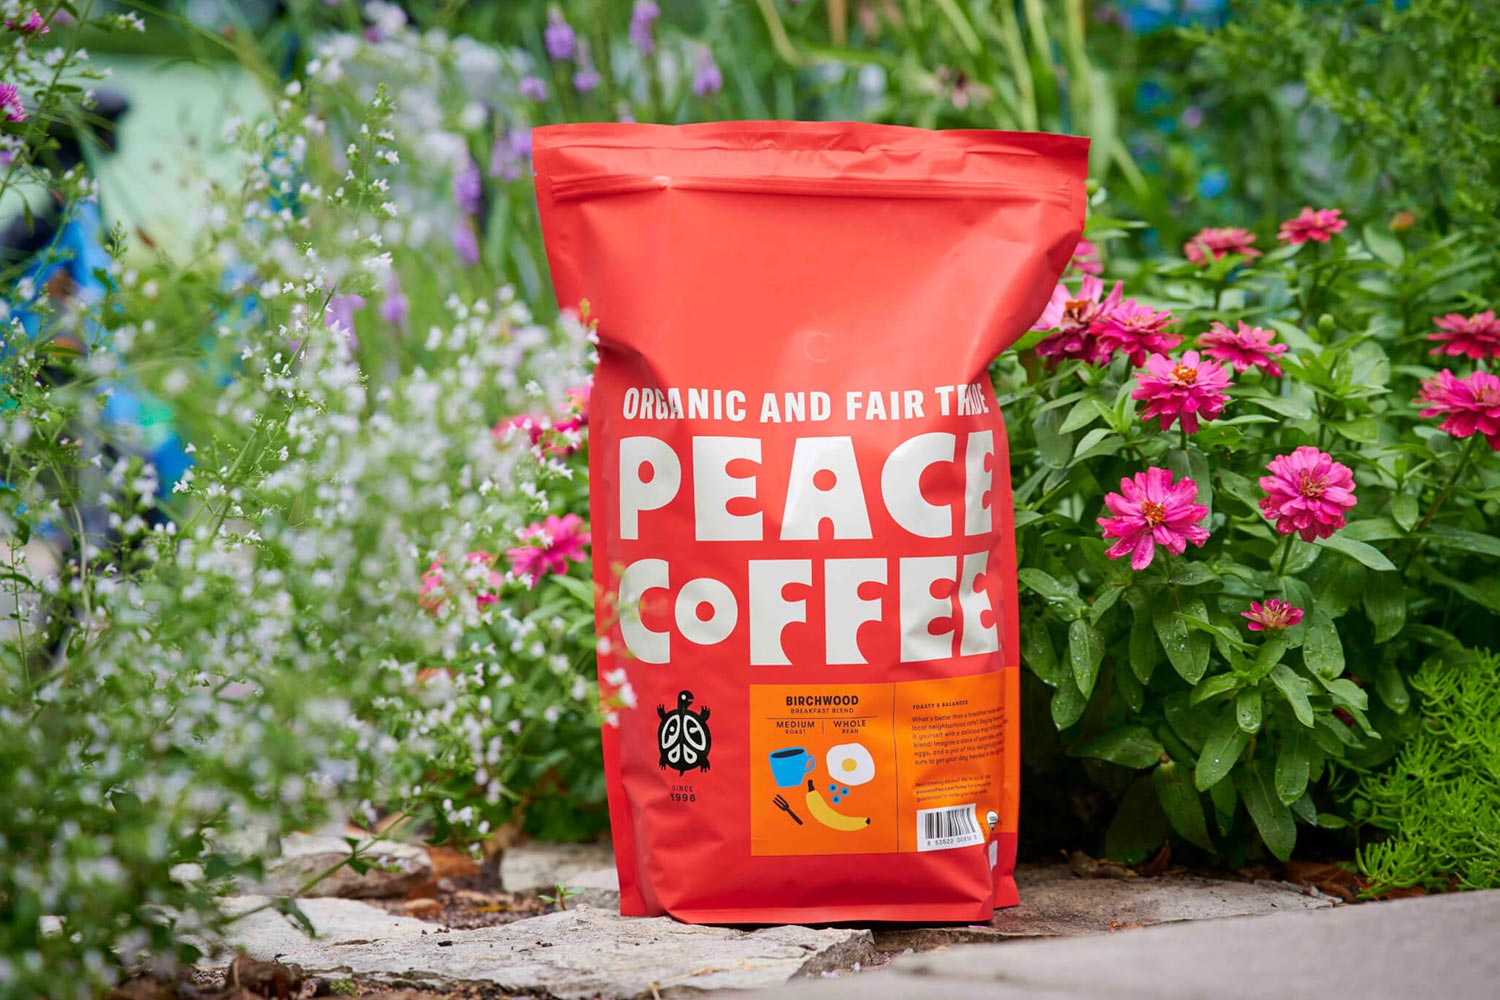 A five-pound bag of Peace Coffee Birchwood blend. This is the size I buy, buy you can get the coffee beans in smaller quantities.